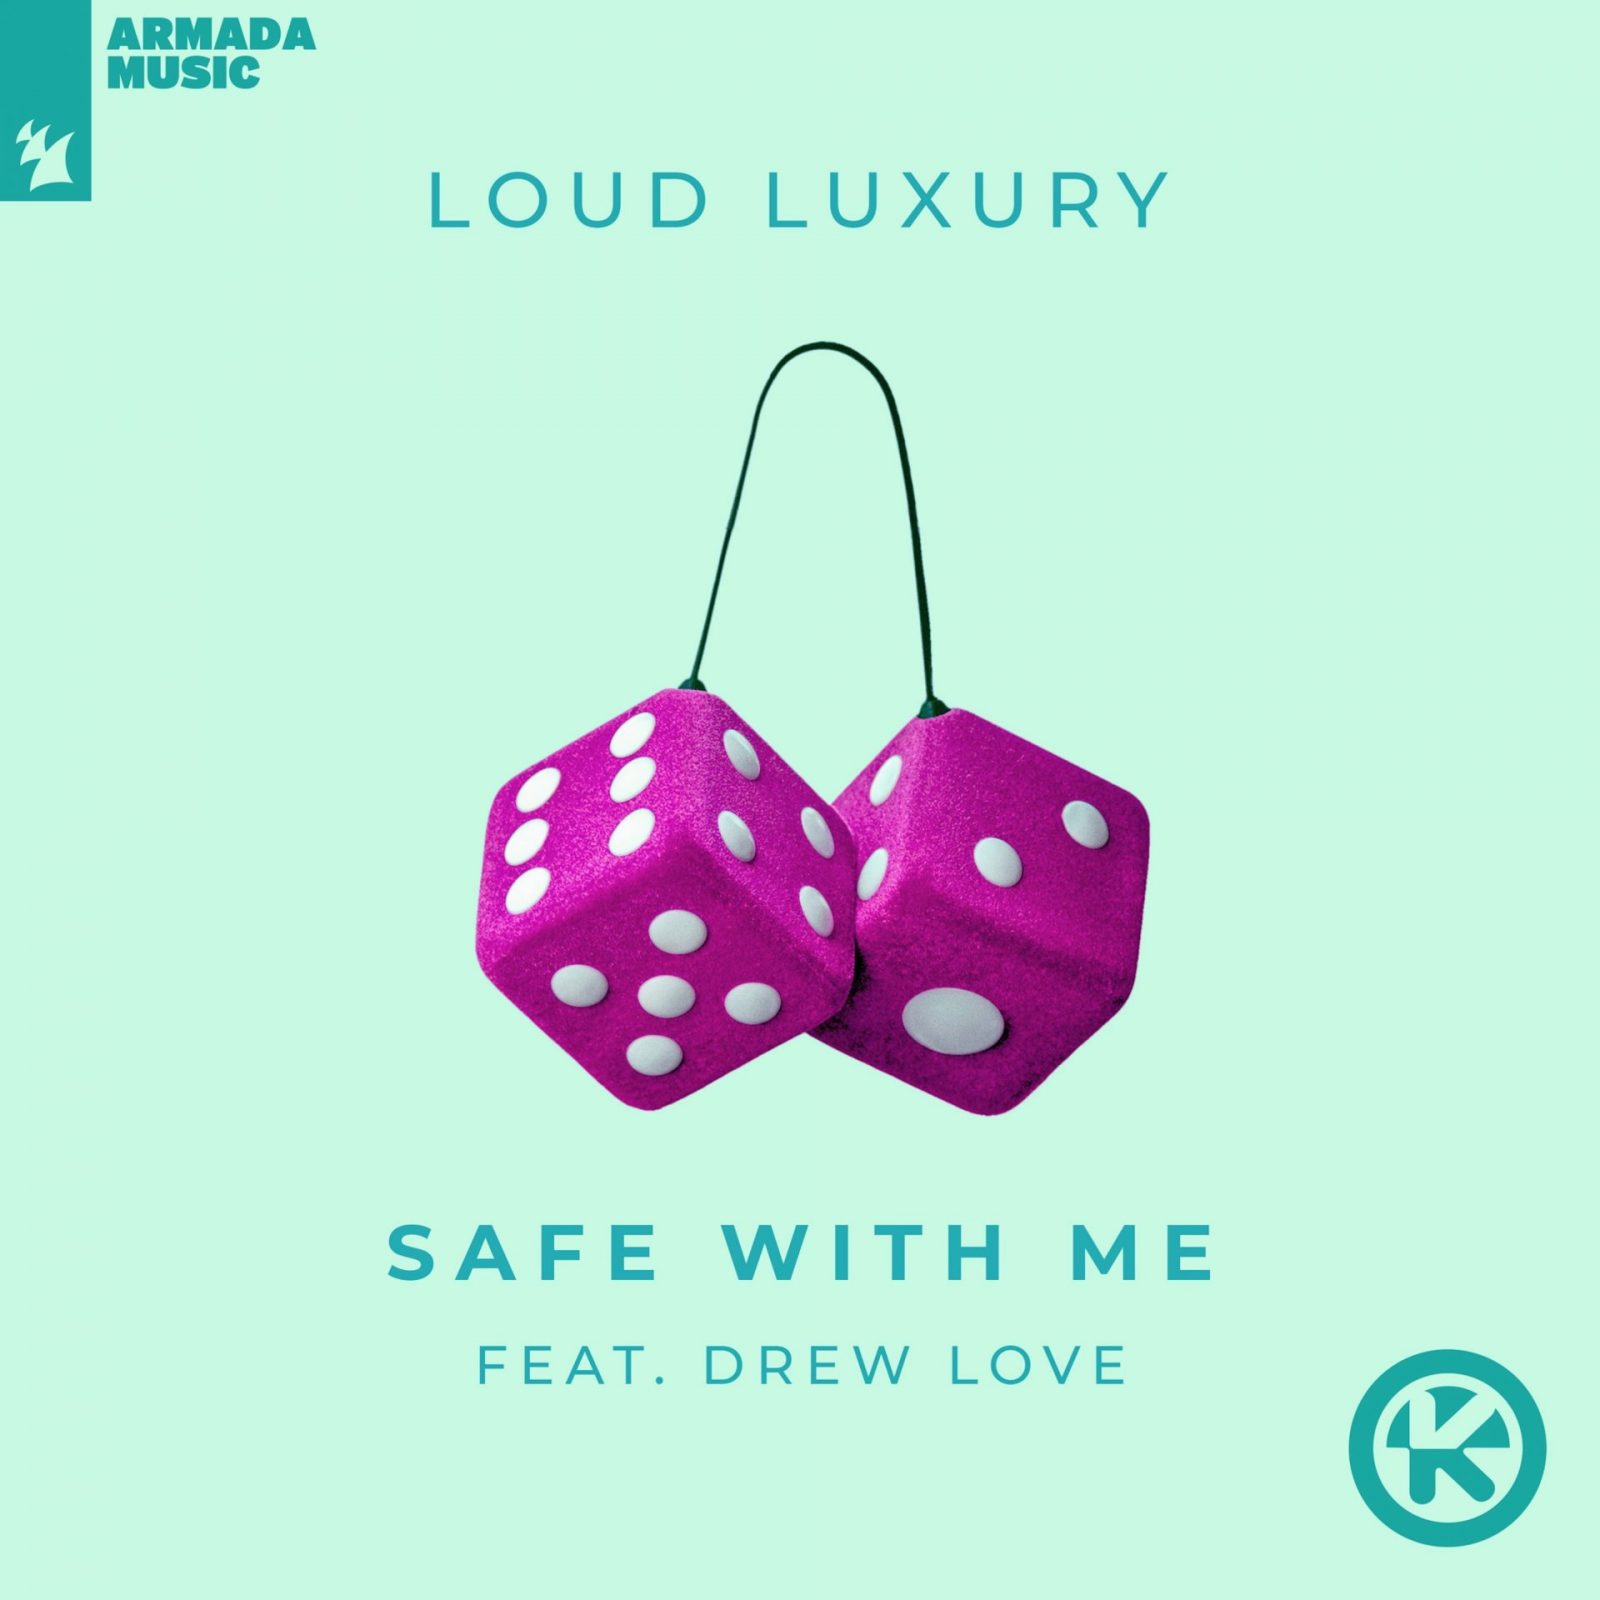 LOUD LUXURY FEAT. DREW LOVE – SAFE WITH ME